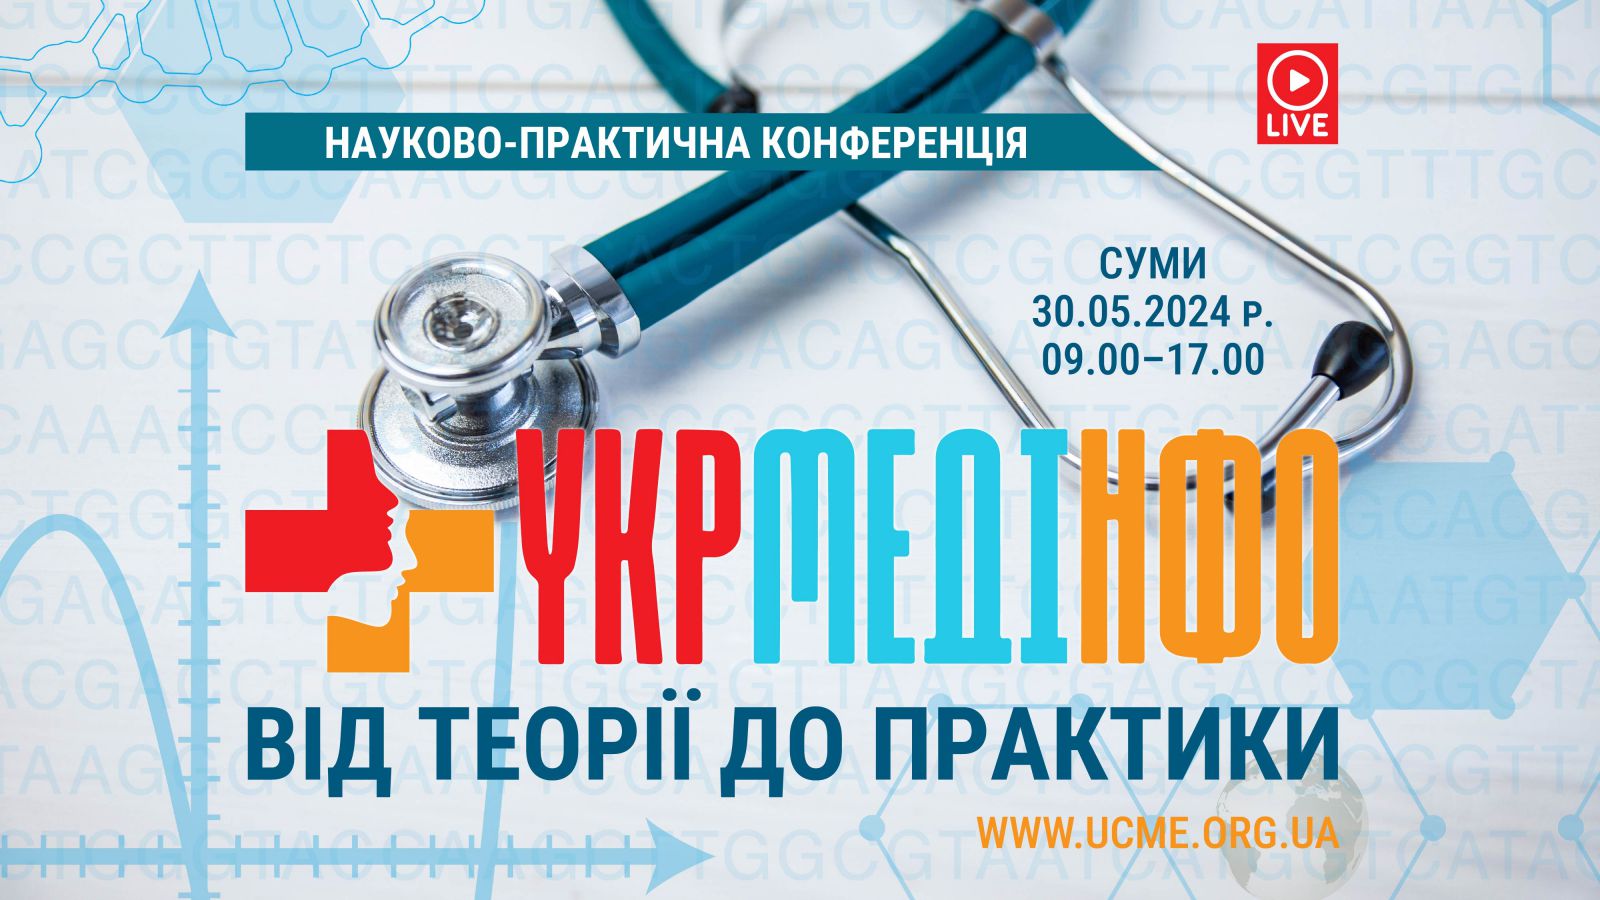 UkrMedInfo: from theory to practice